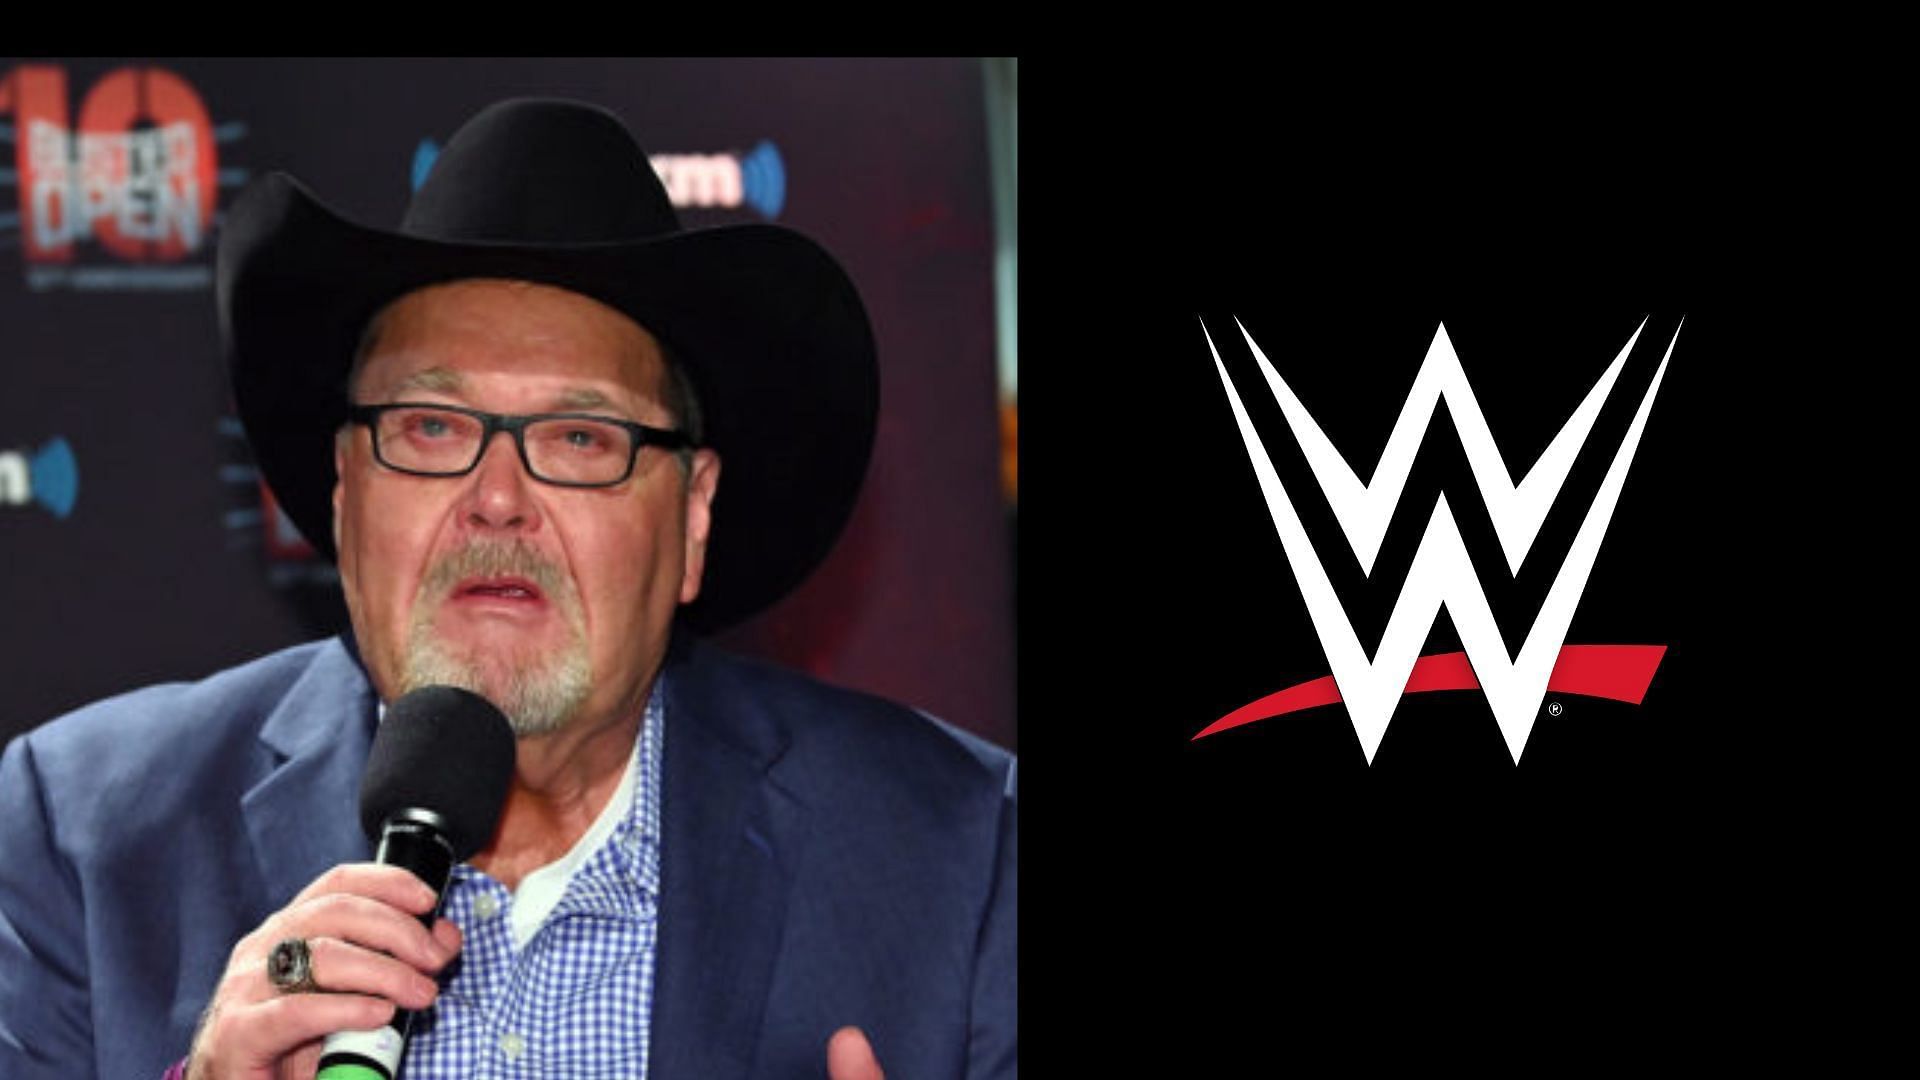 Jim Ross is currently working as a commentator and senior advisor in AEW